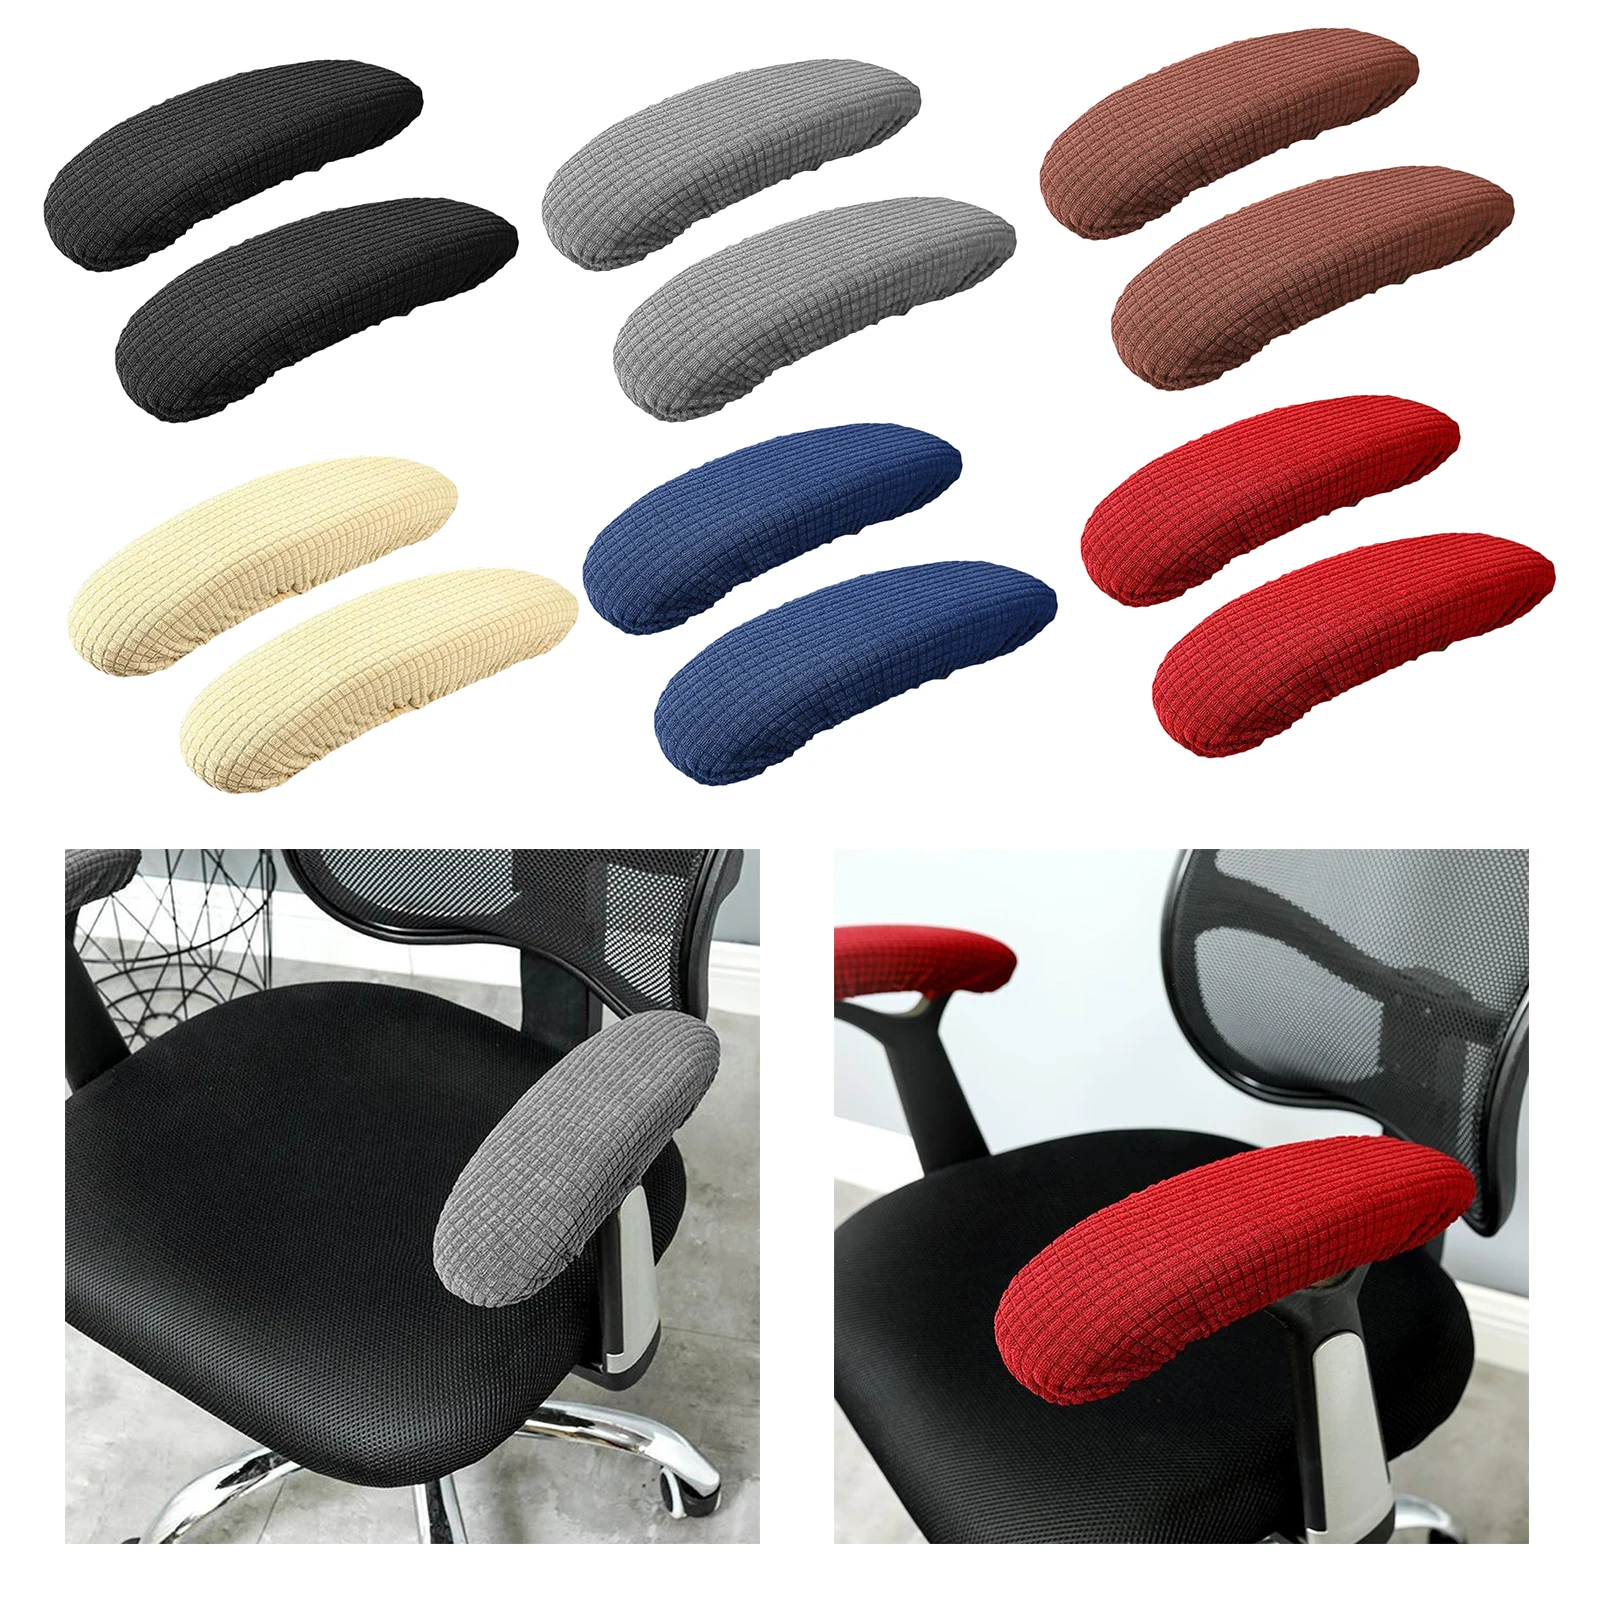 Office Chair Cover Office Computer Chair Armrest Cover Dustproof 1 Pair 